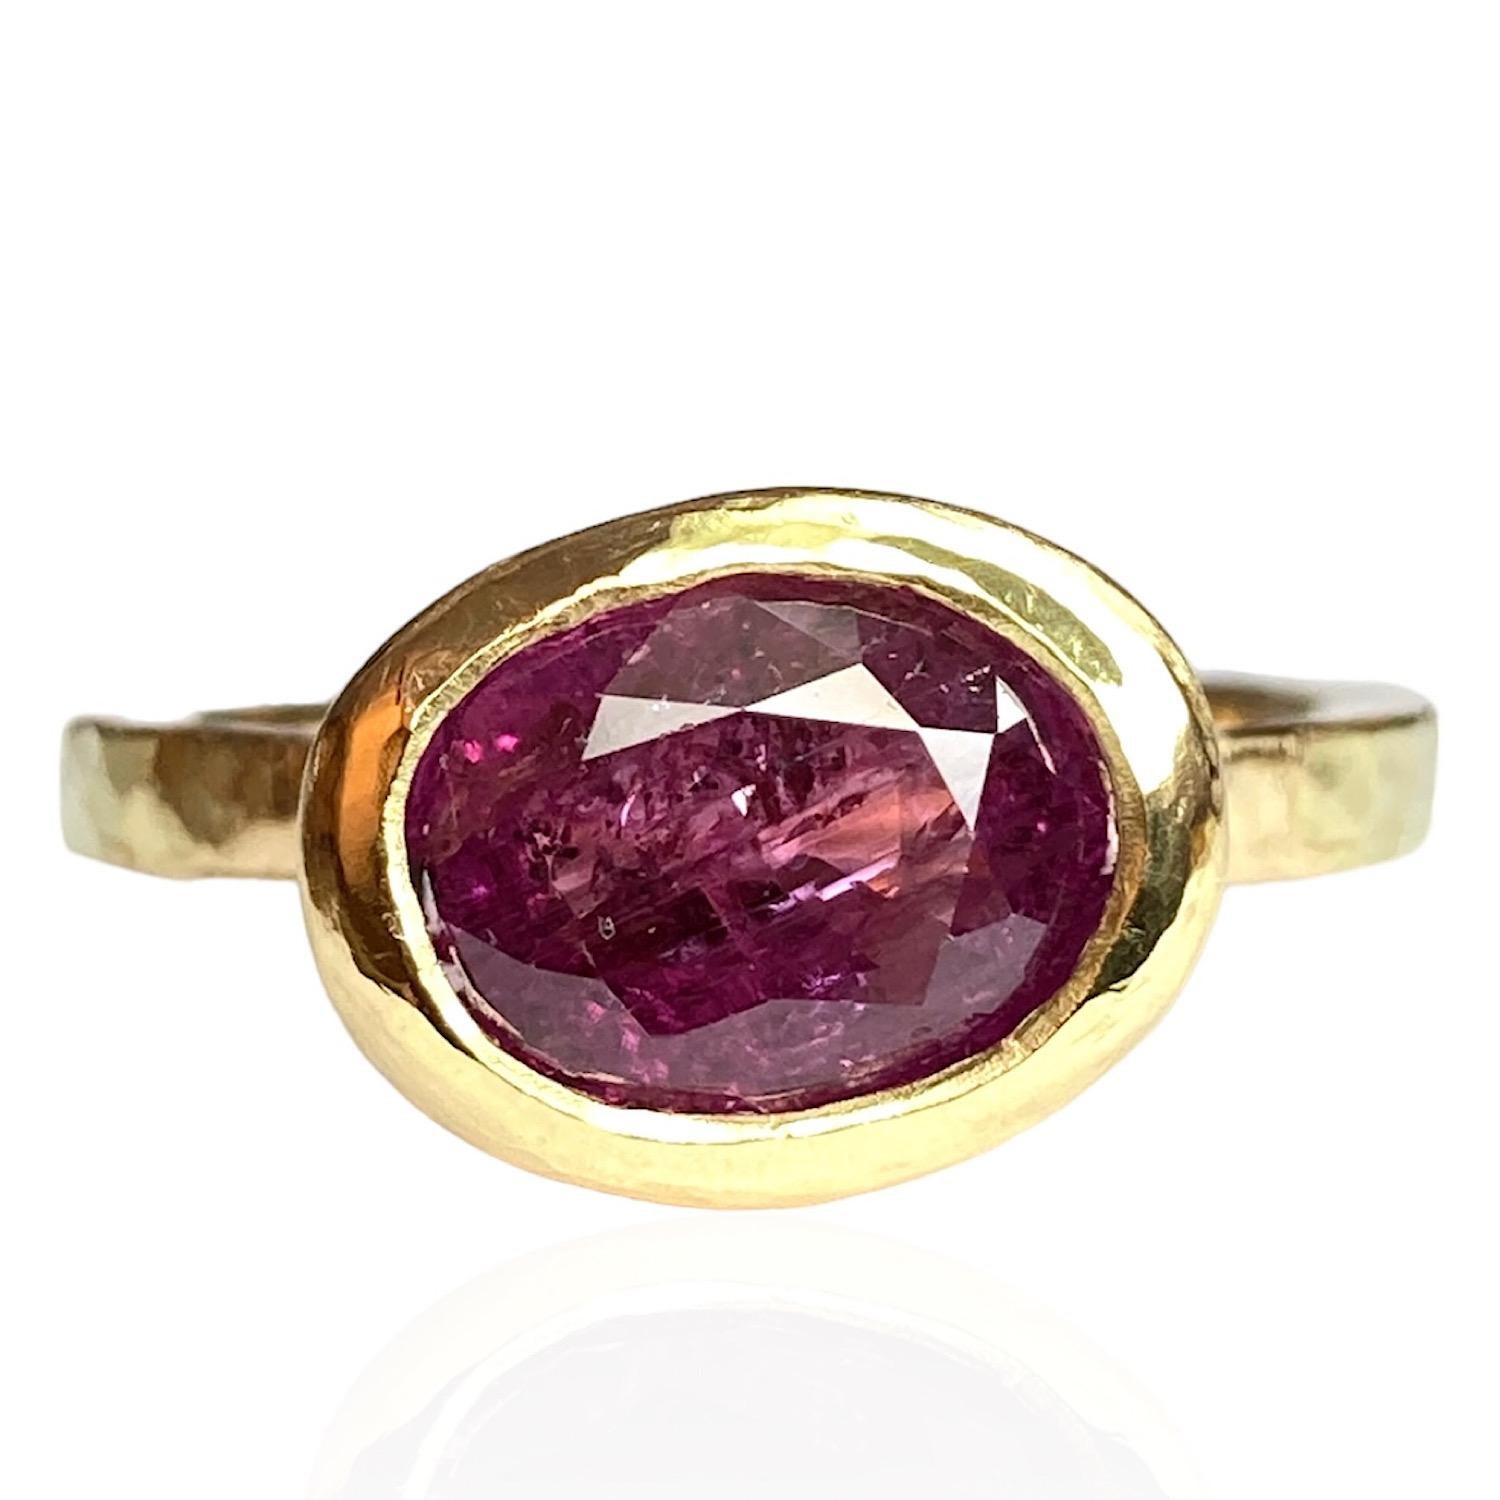 One Of A Kind 18ct Yellow Gold Ring by Deborah Murdoch is from the Abundance Collection featuring an oval 2.82ct Rich Pink Sapphire Stone. The ring band and setting is slightly planished giving that textural feel and has a silky satin